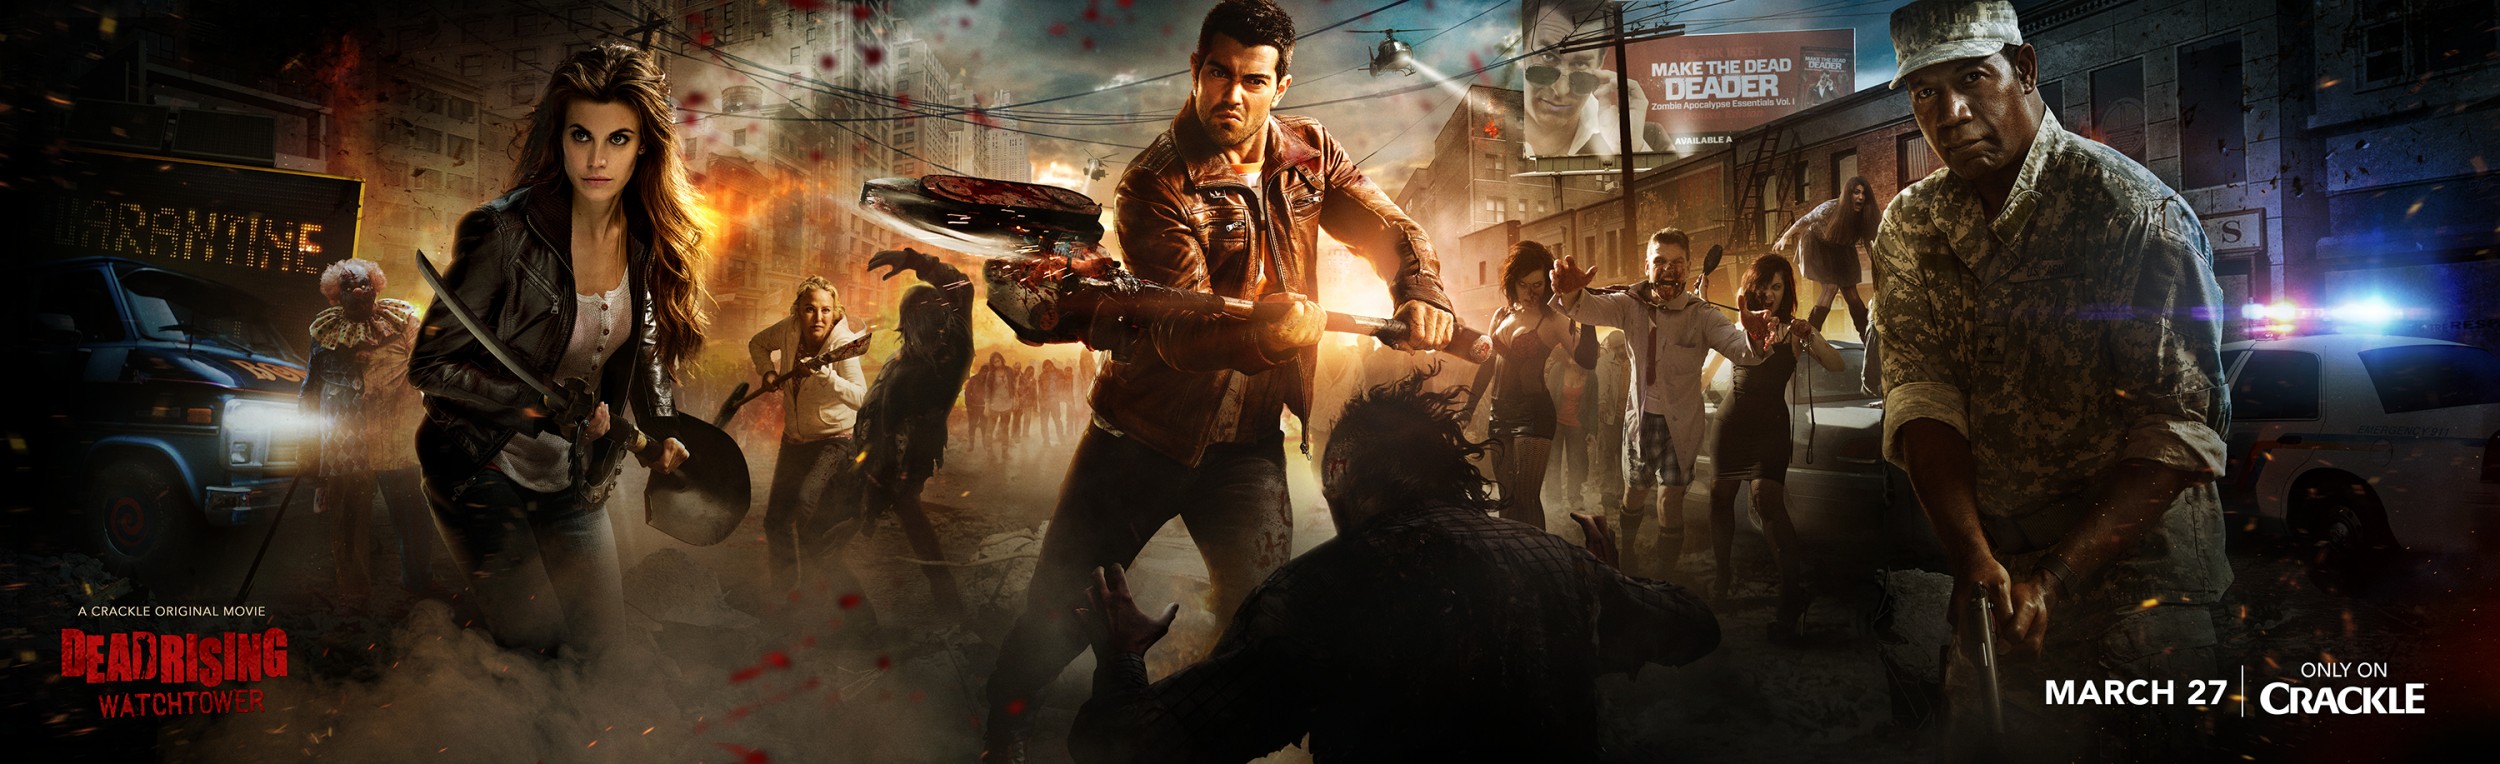 Mega Sized TV Poster Image for Dead Rising: Watchtower (#8 of 8)